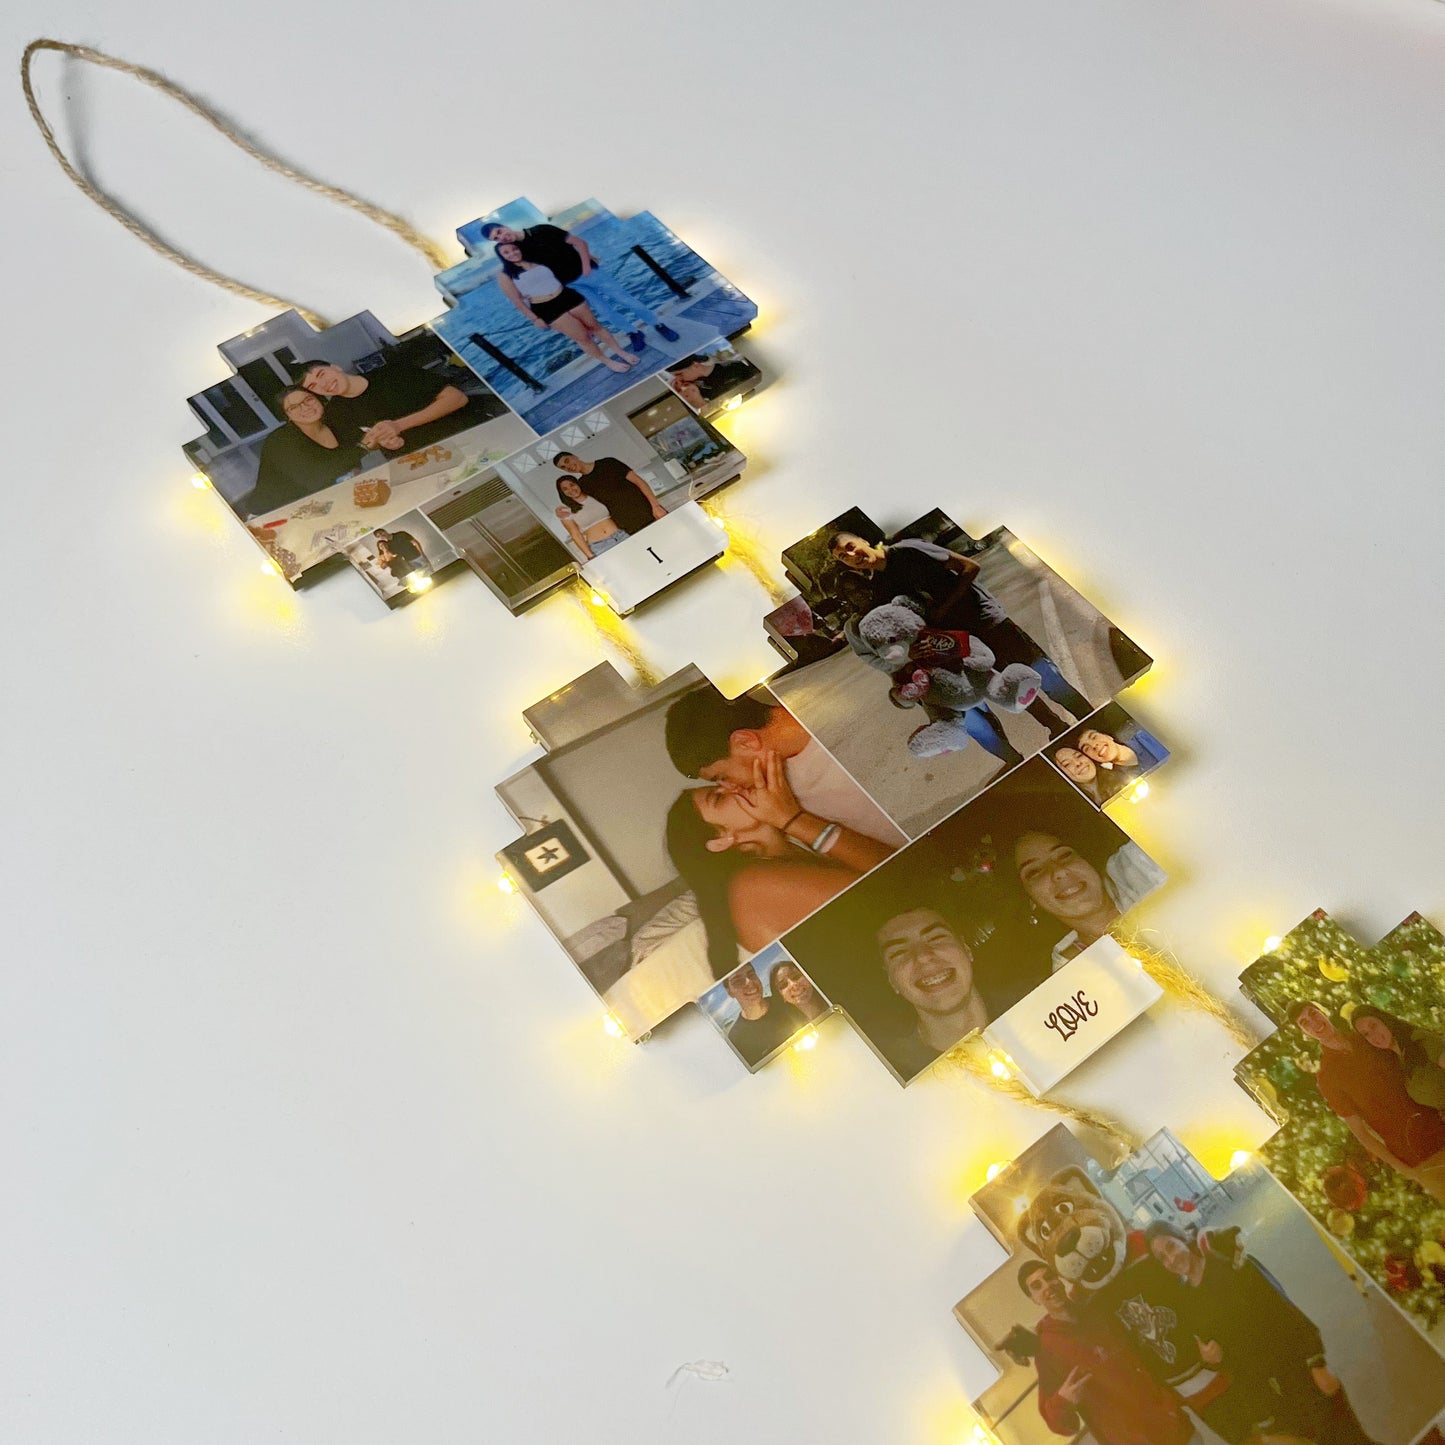 ✨Personalized Heart Photo Collage Lamp